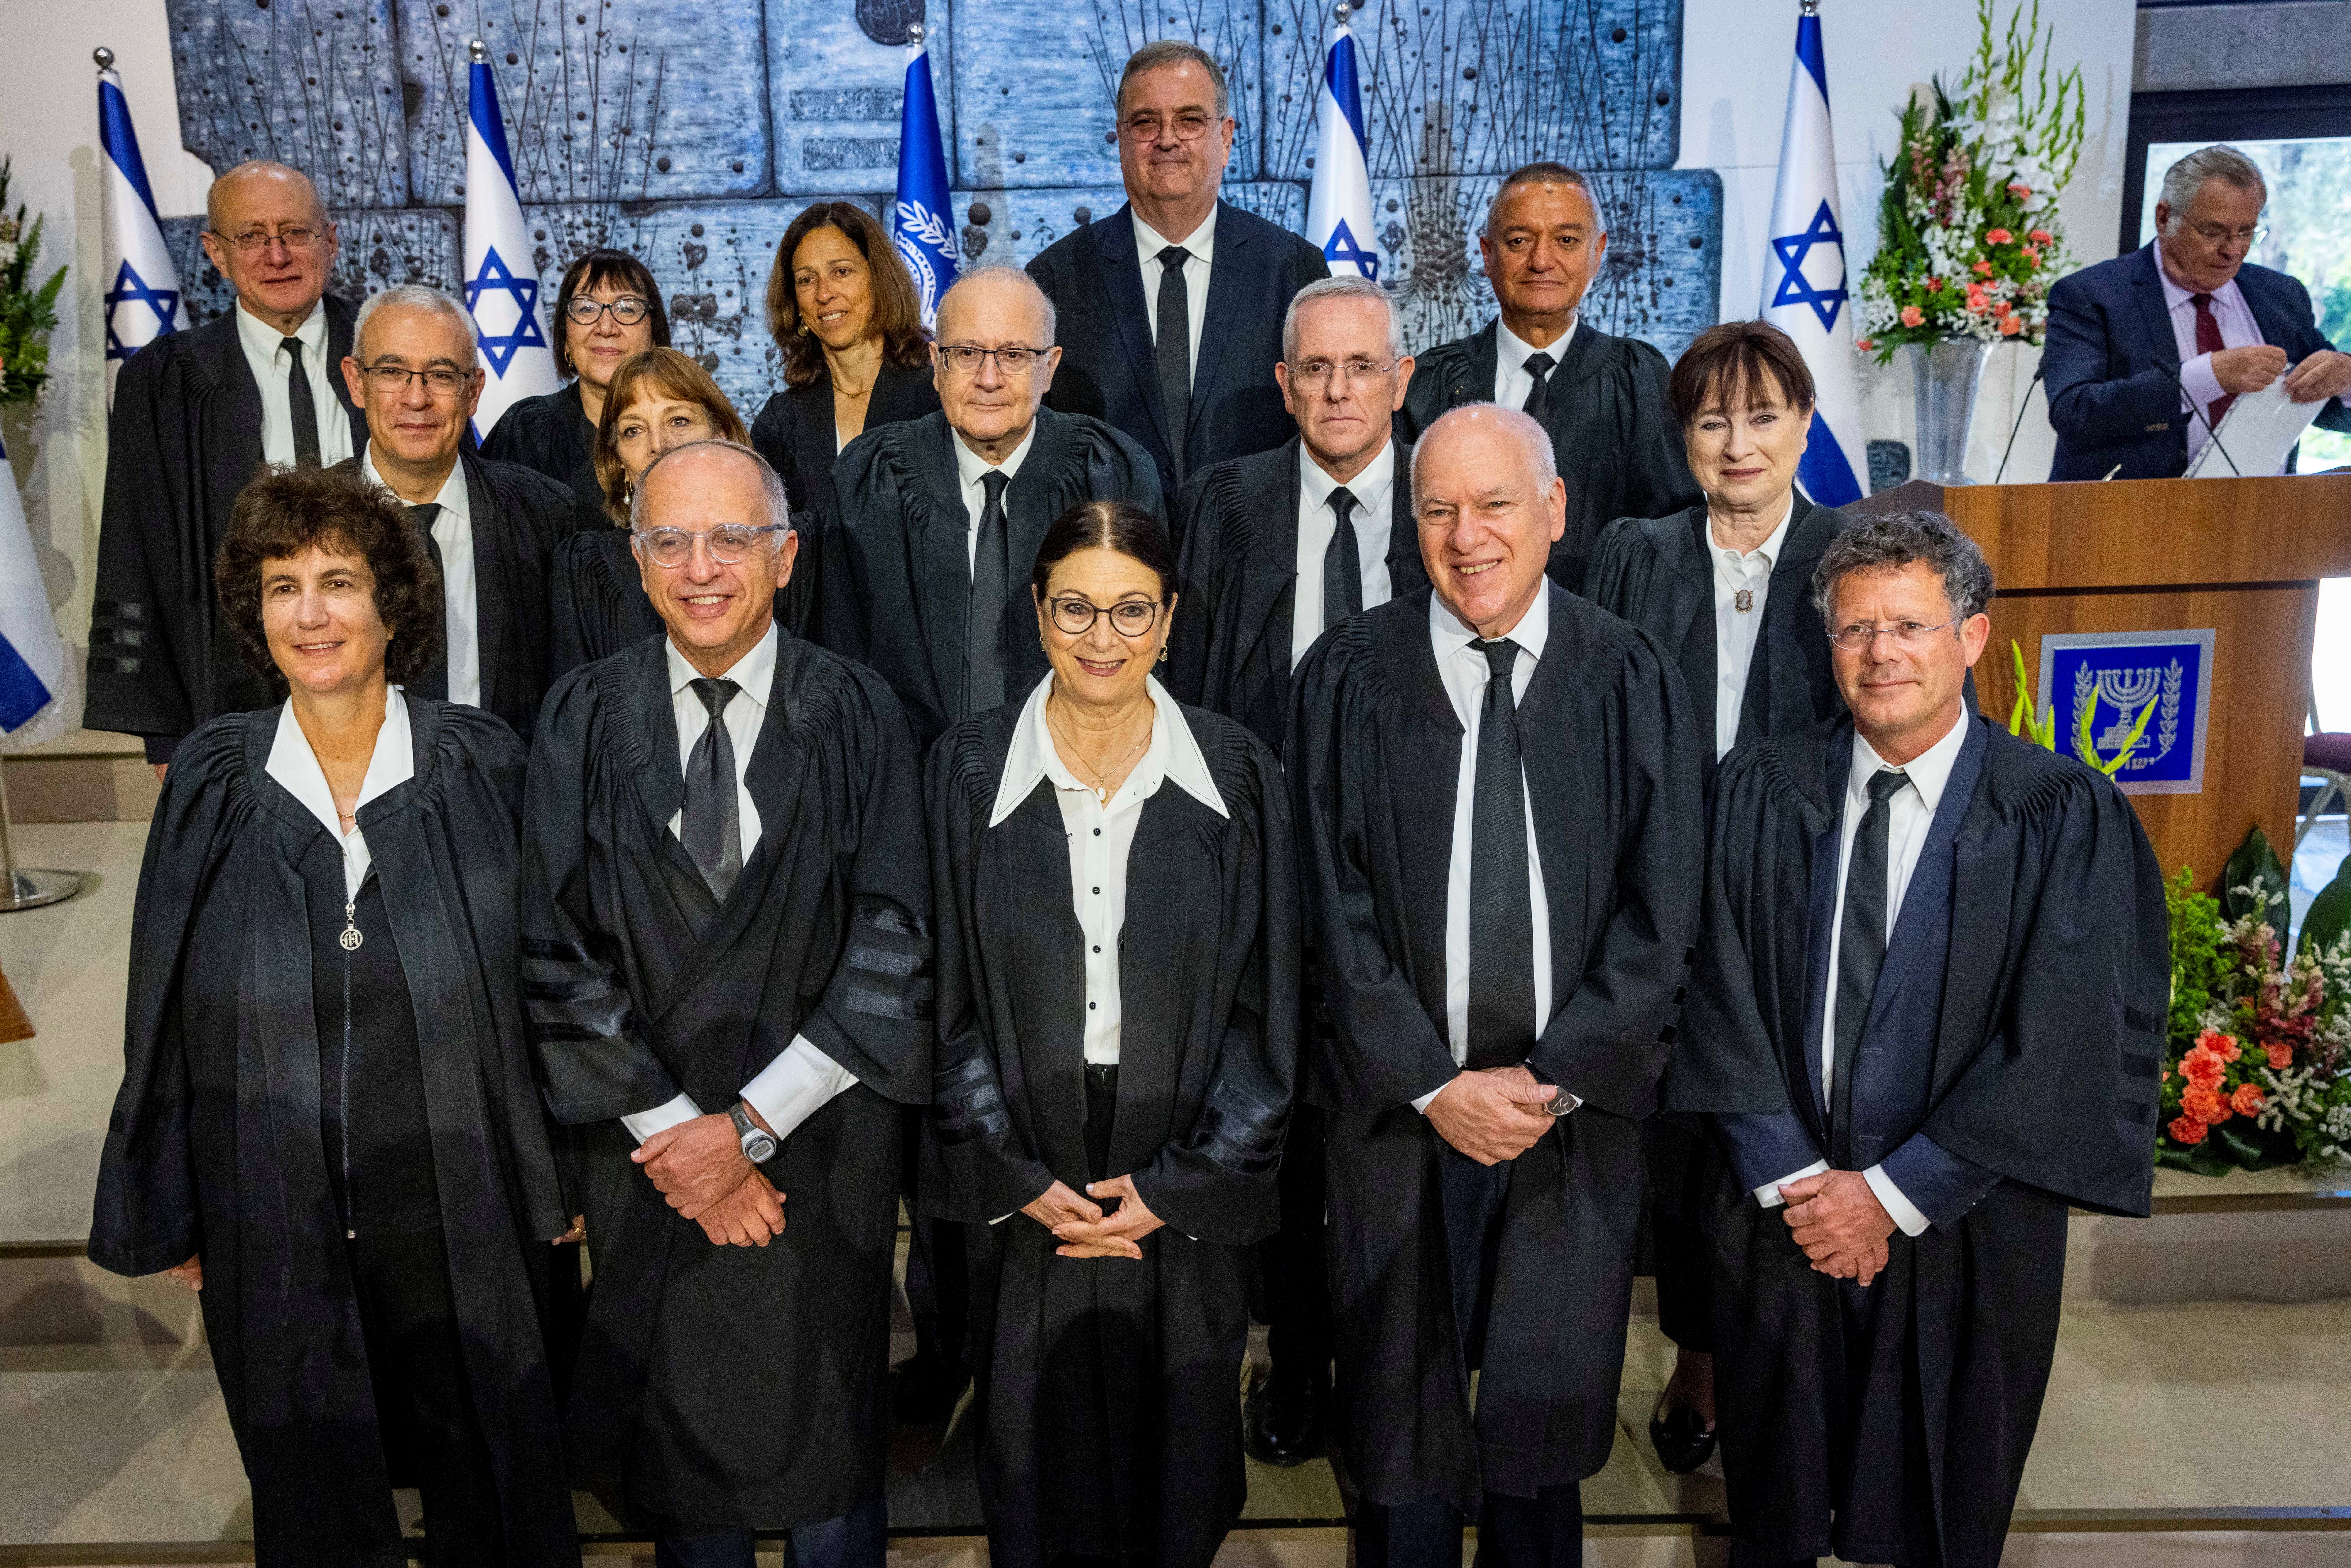 Israelis are deeply divided on the upcoming Supreme Court hearings